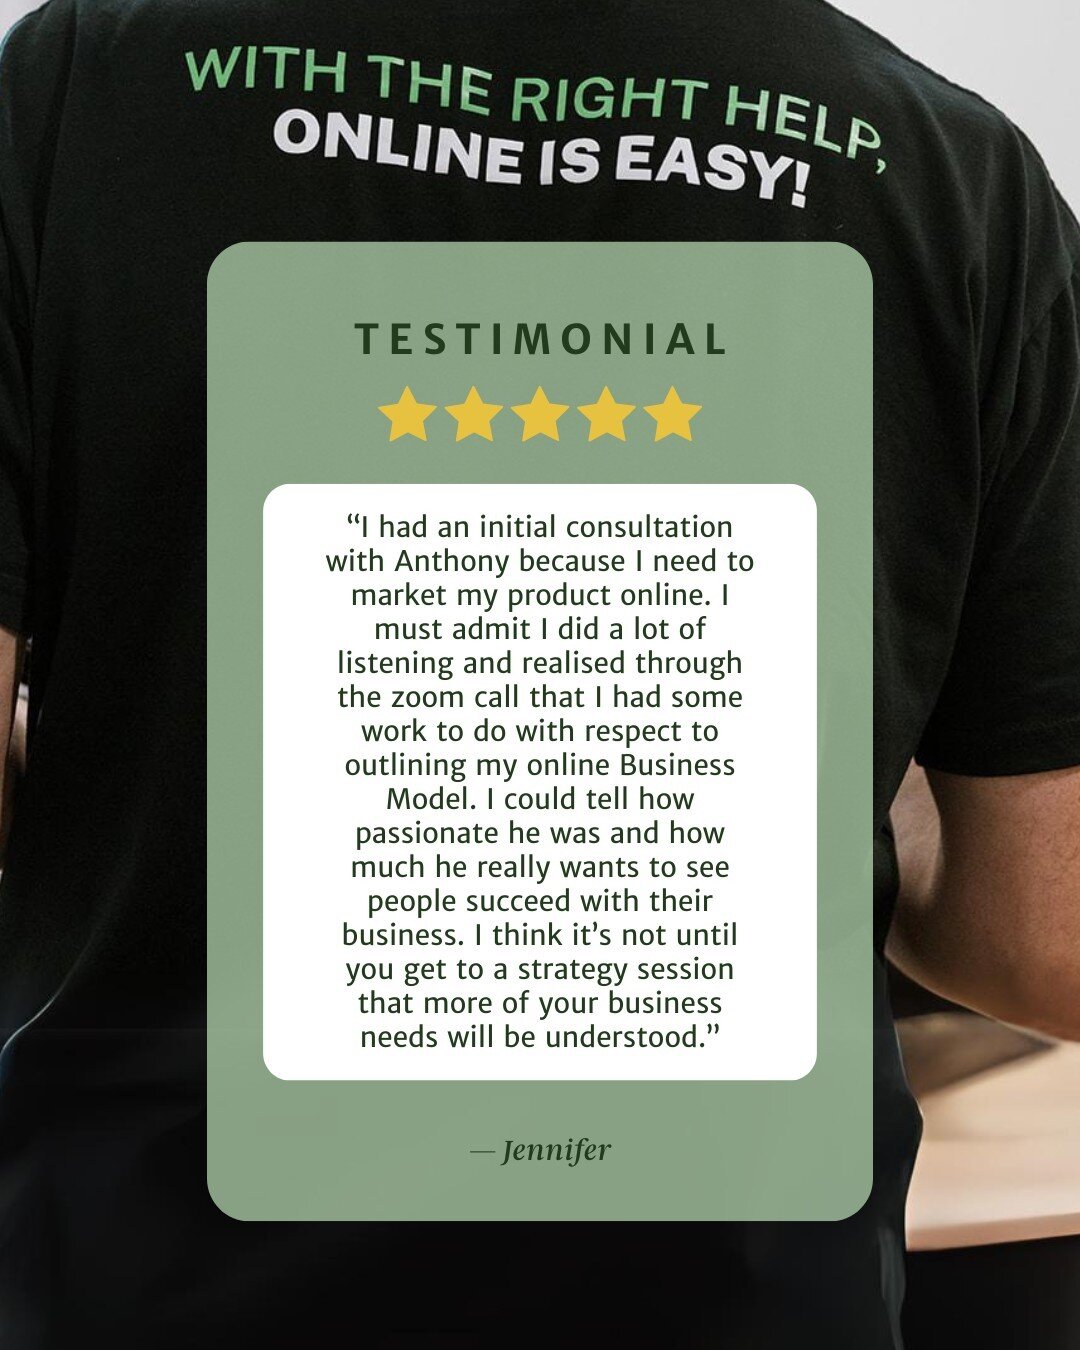 Here&rsquo;s one of the many reasons we get five stars on our reviews 🌟⁠
⁠
Step into Jennifer&rsquo;s shoes as she shares with us how the Digital Strategy supported her in her business. ⁠
⁠
&ldquo;I had an initial consultation with Anthony because I